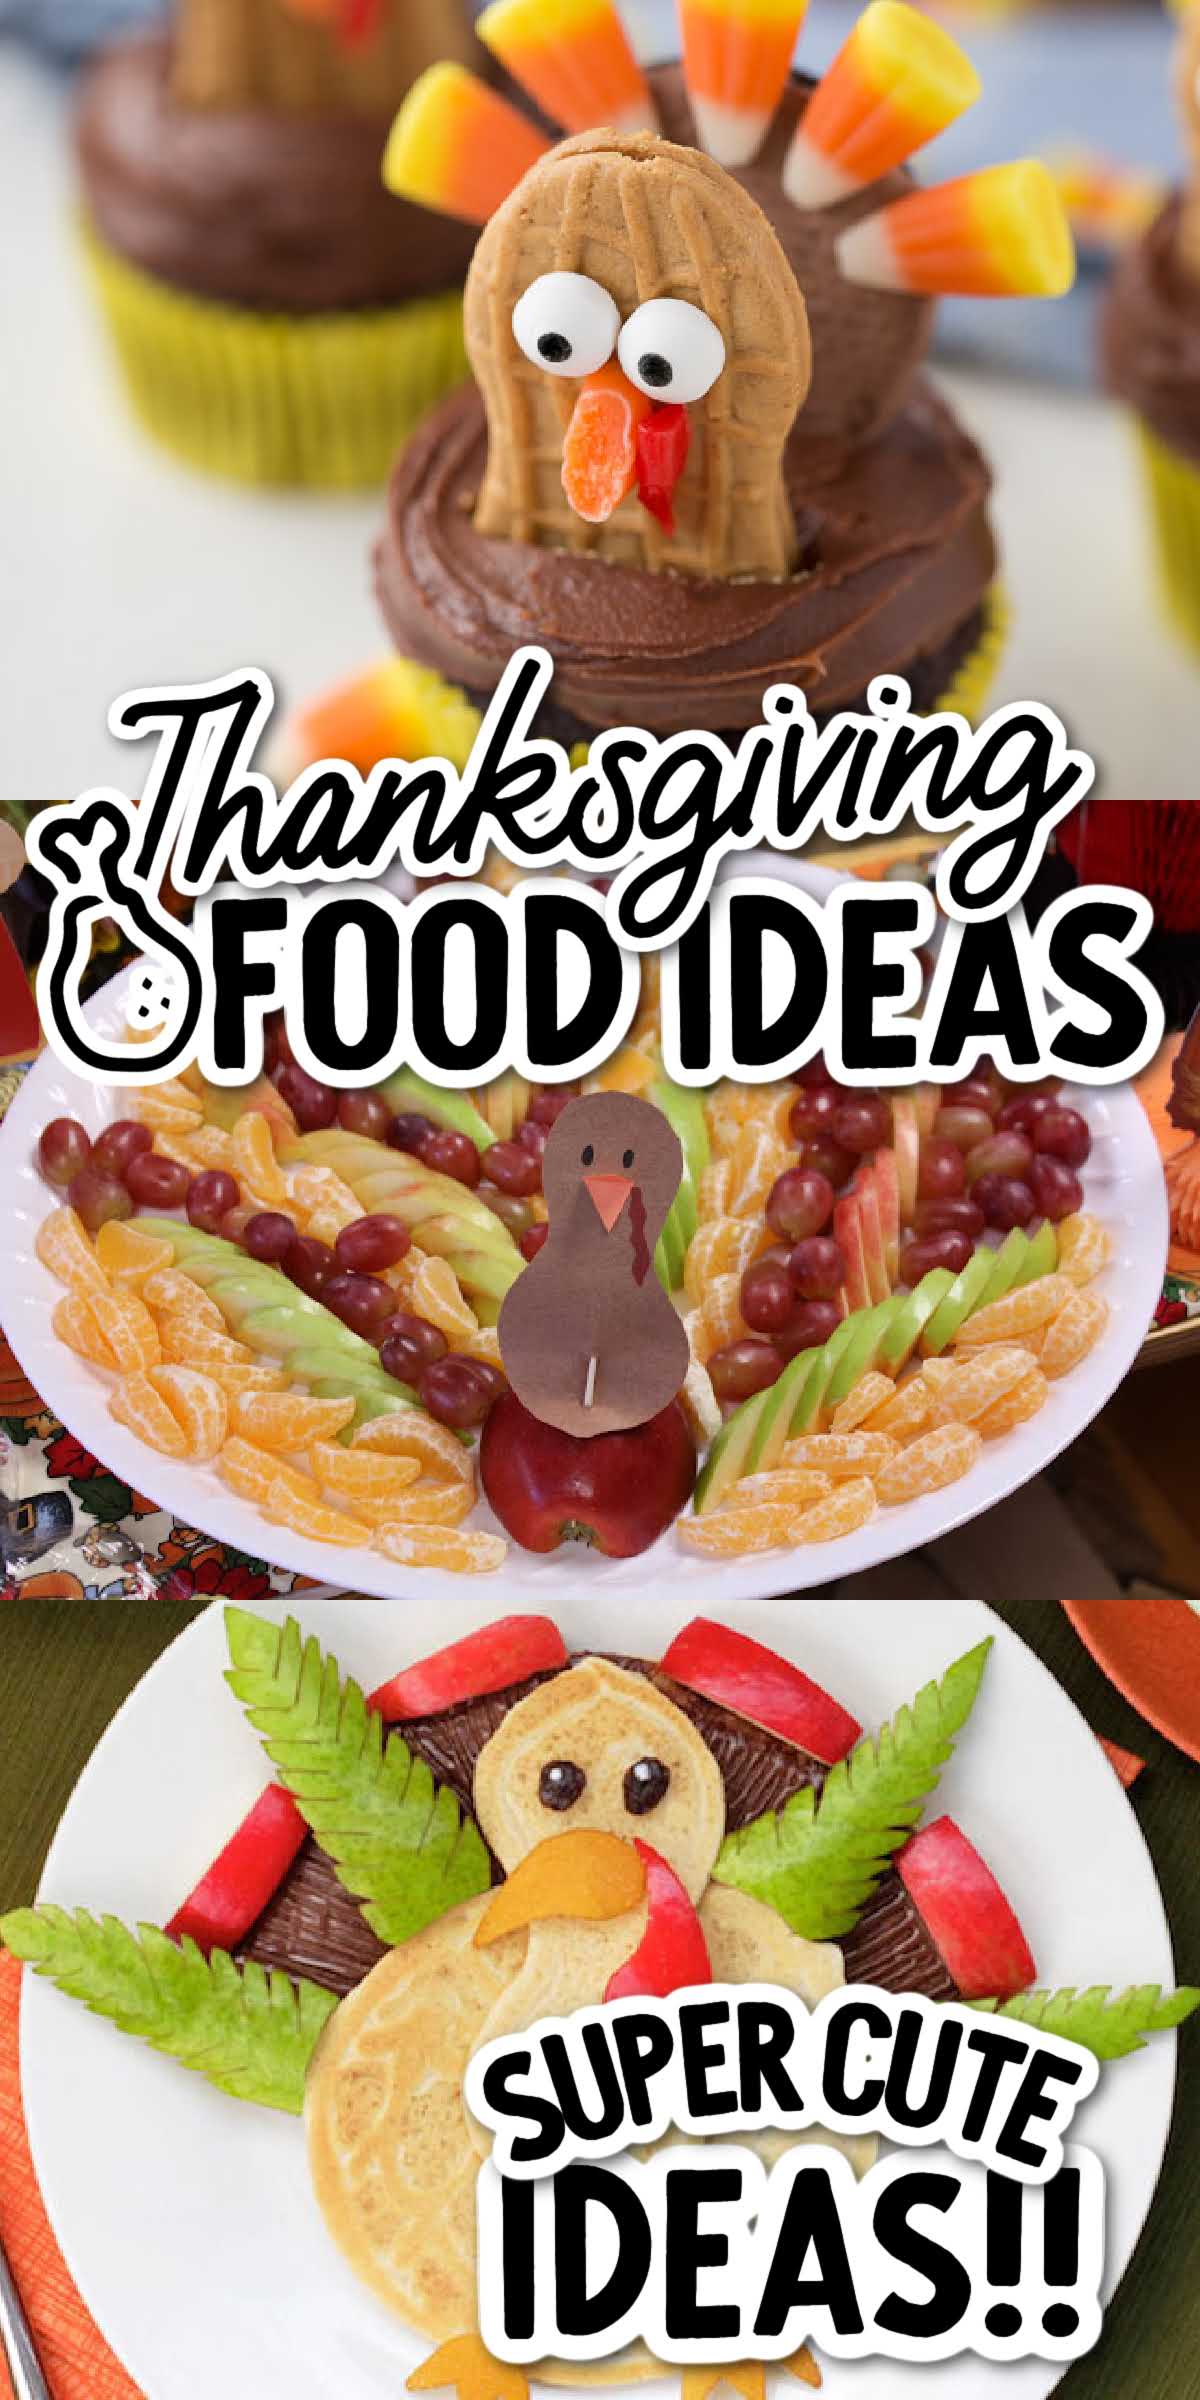 11 Cute Thanksgiving Party Food Ideas - Spaceships and Laser Beams